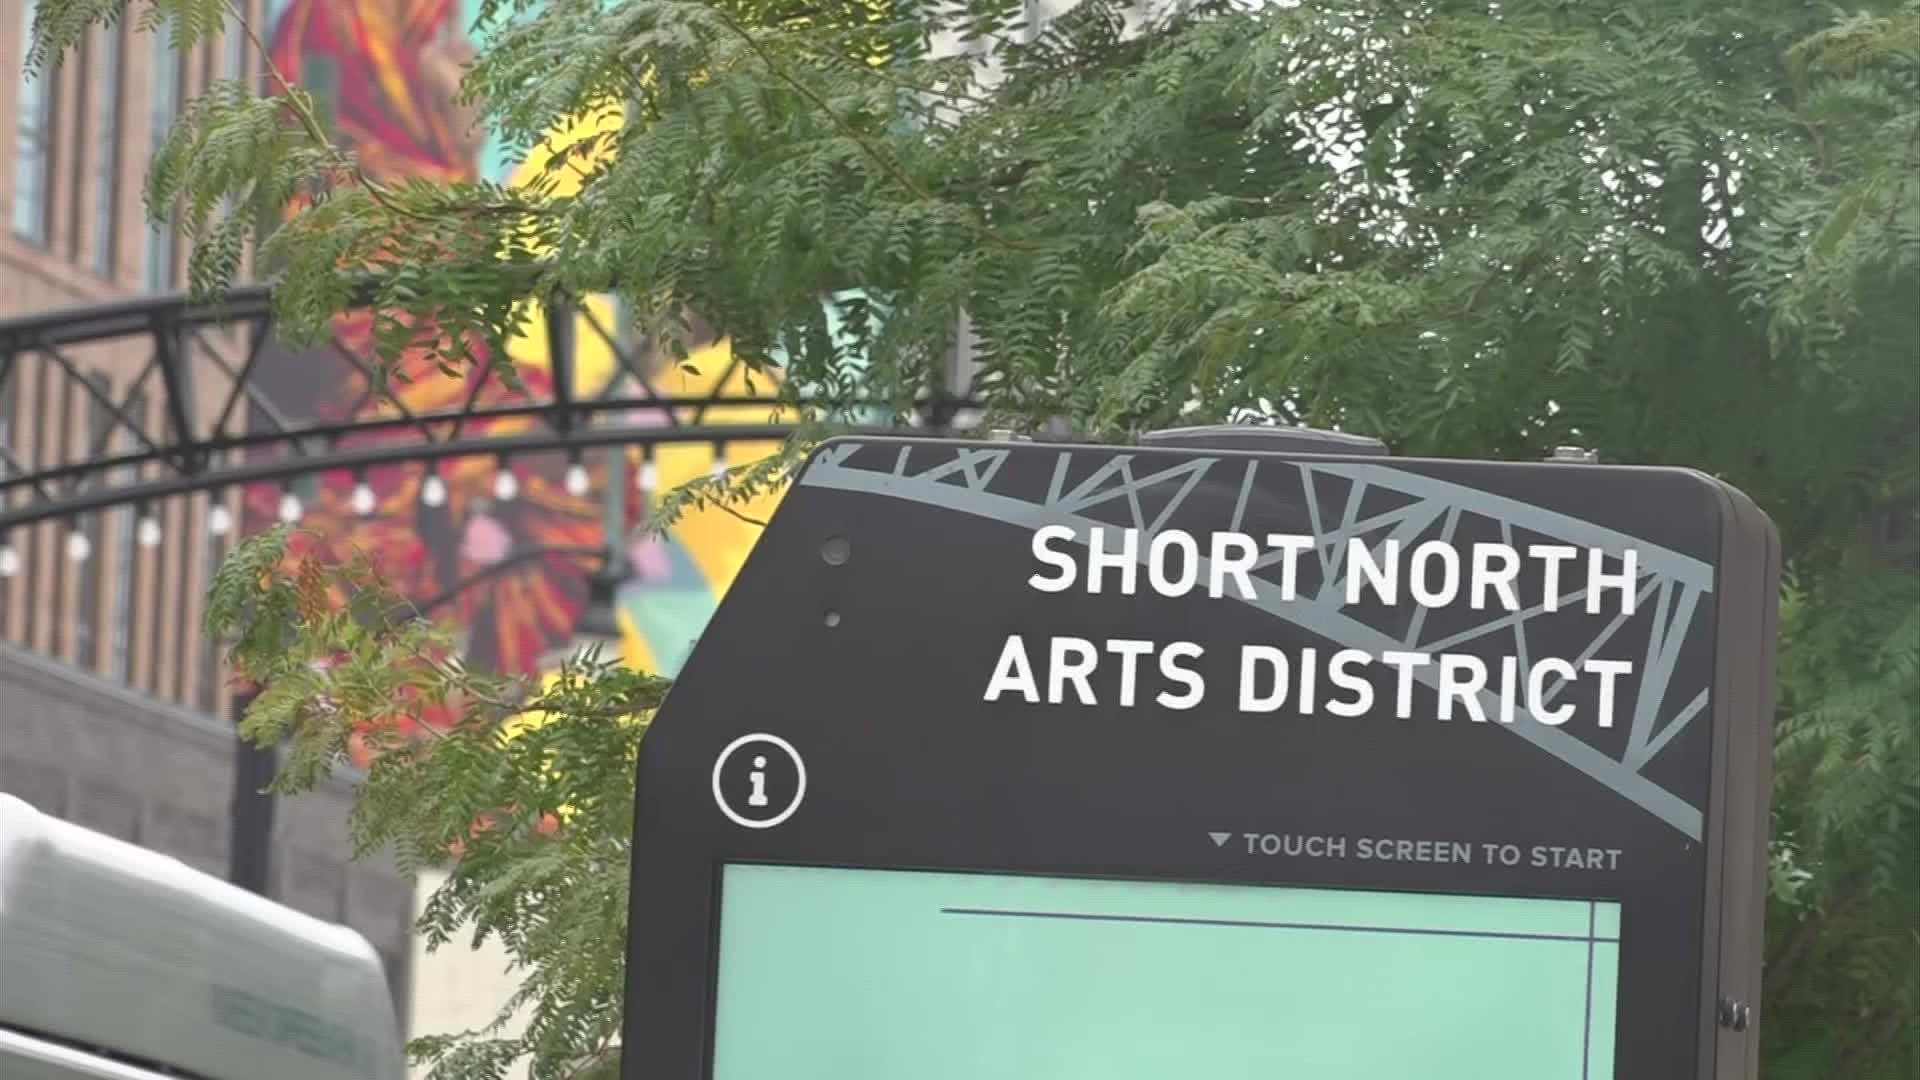 Thousands of people gather every weekend in the Short North to enjoy food, fun and art.